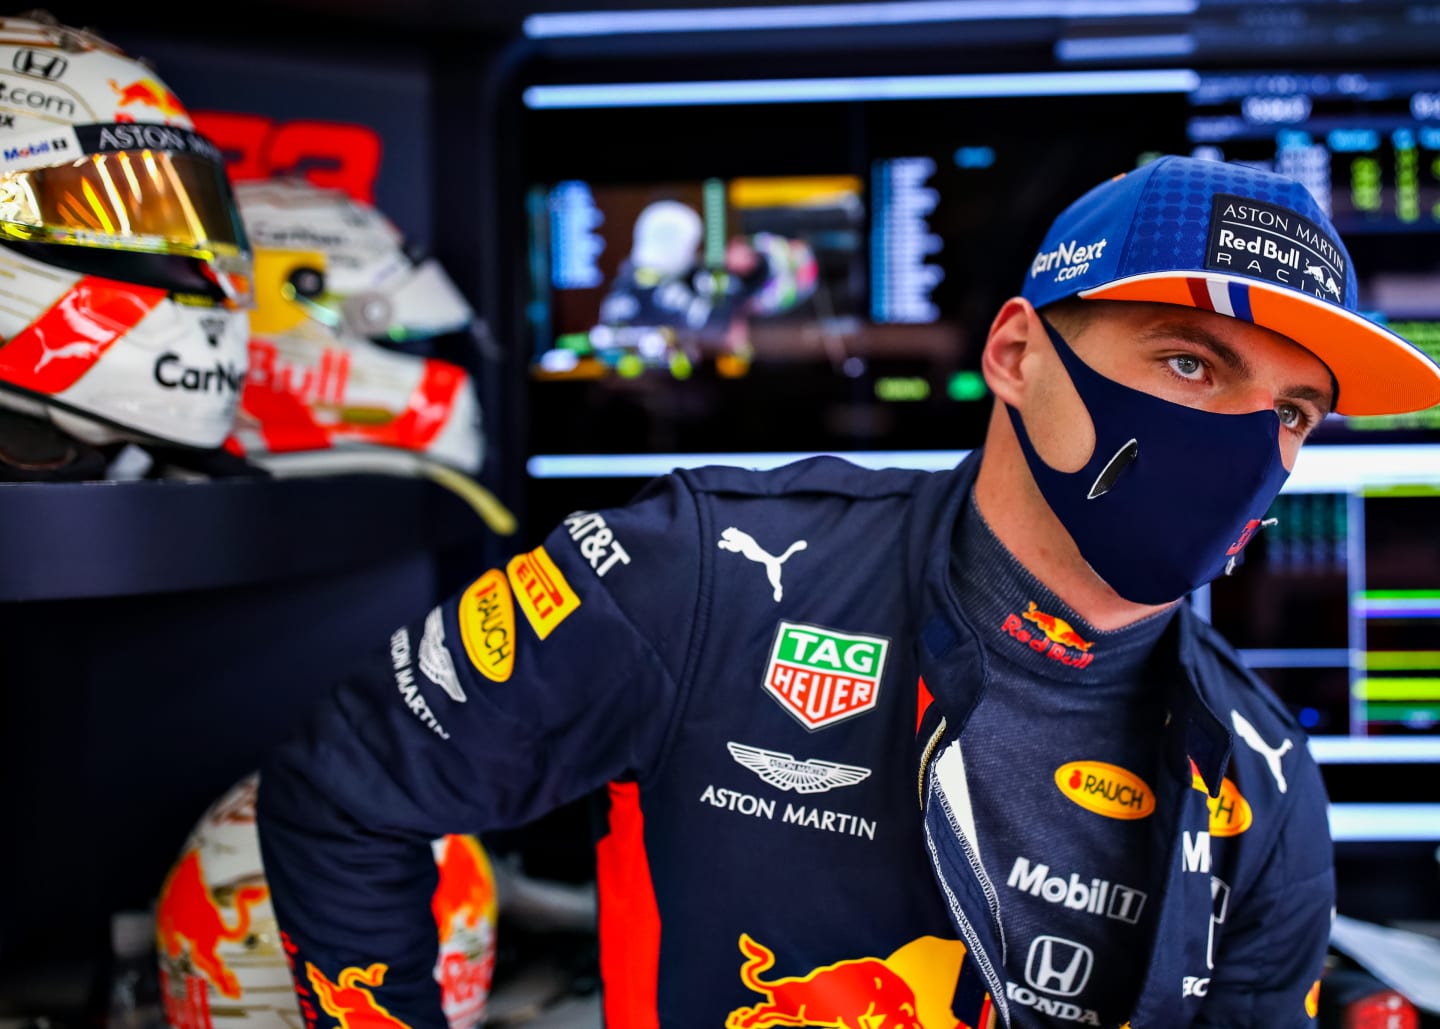 SPA, BELGIUM - AUGUST 28: Max Verstappen of Netherlands and Red Bull Racing looks on in the garage